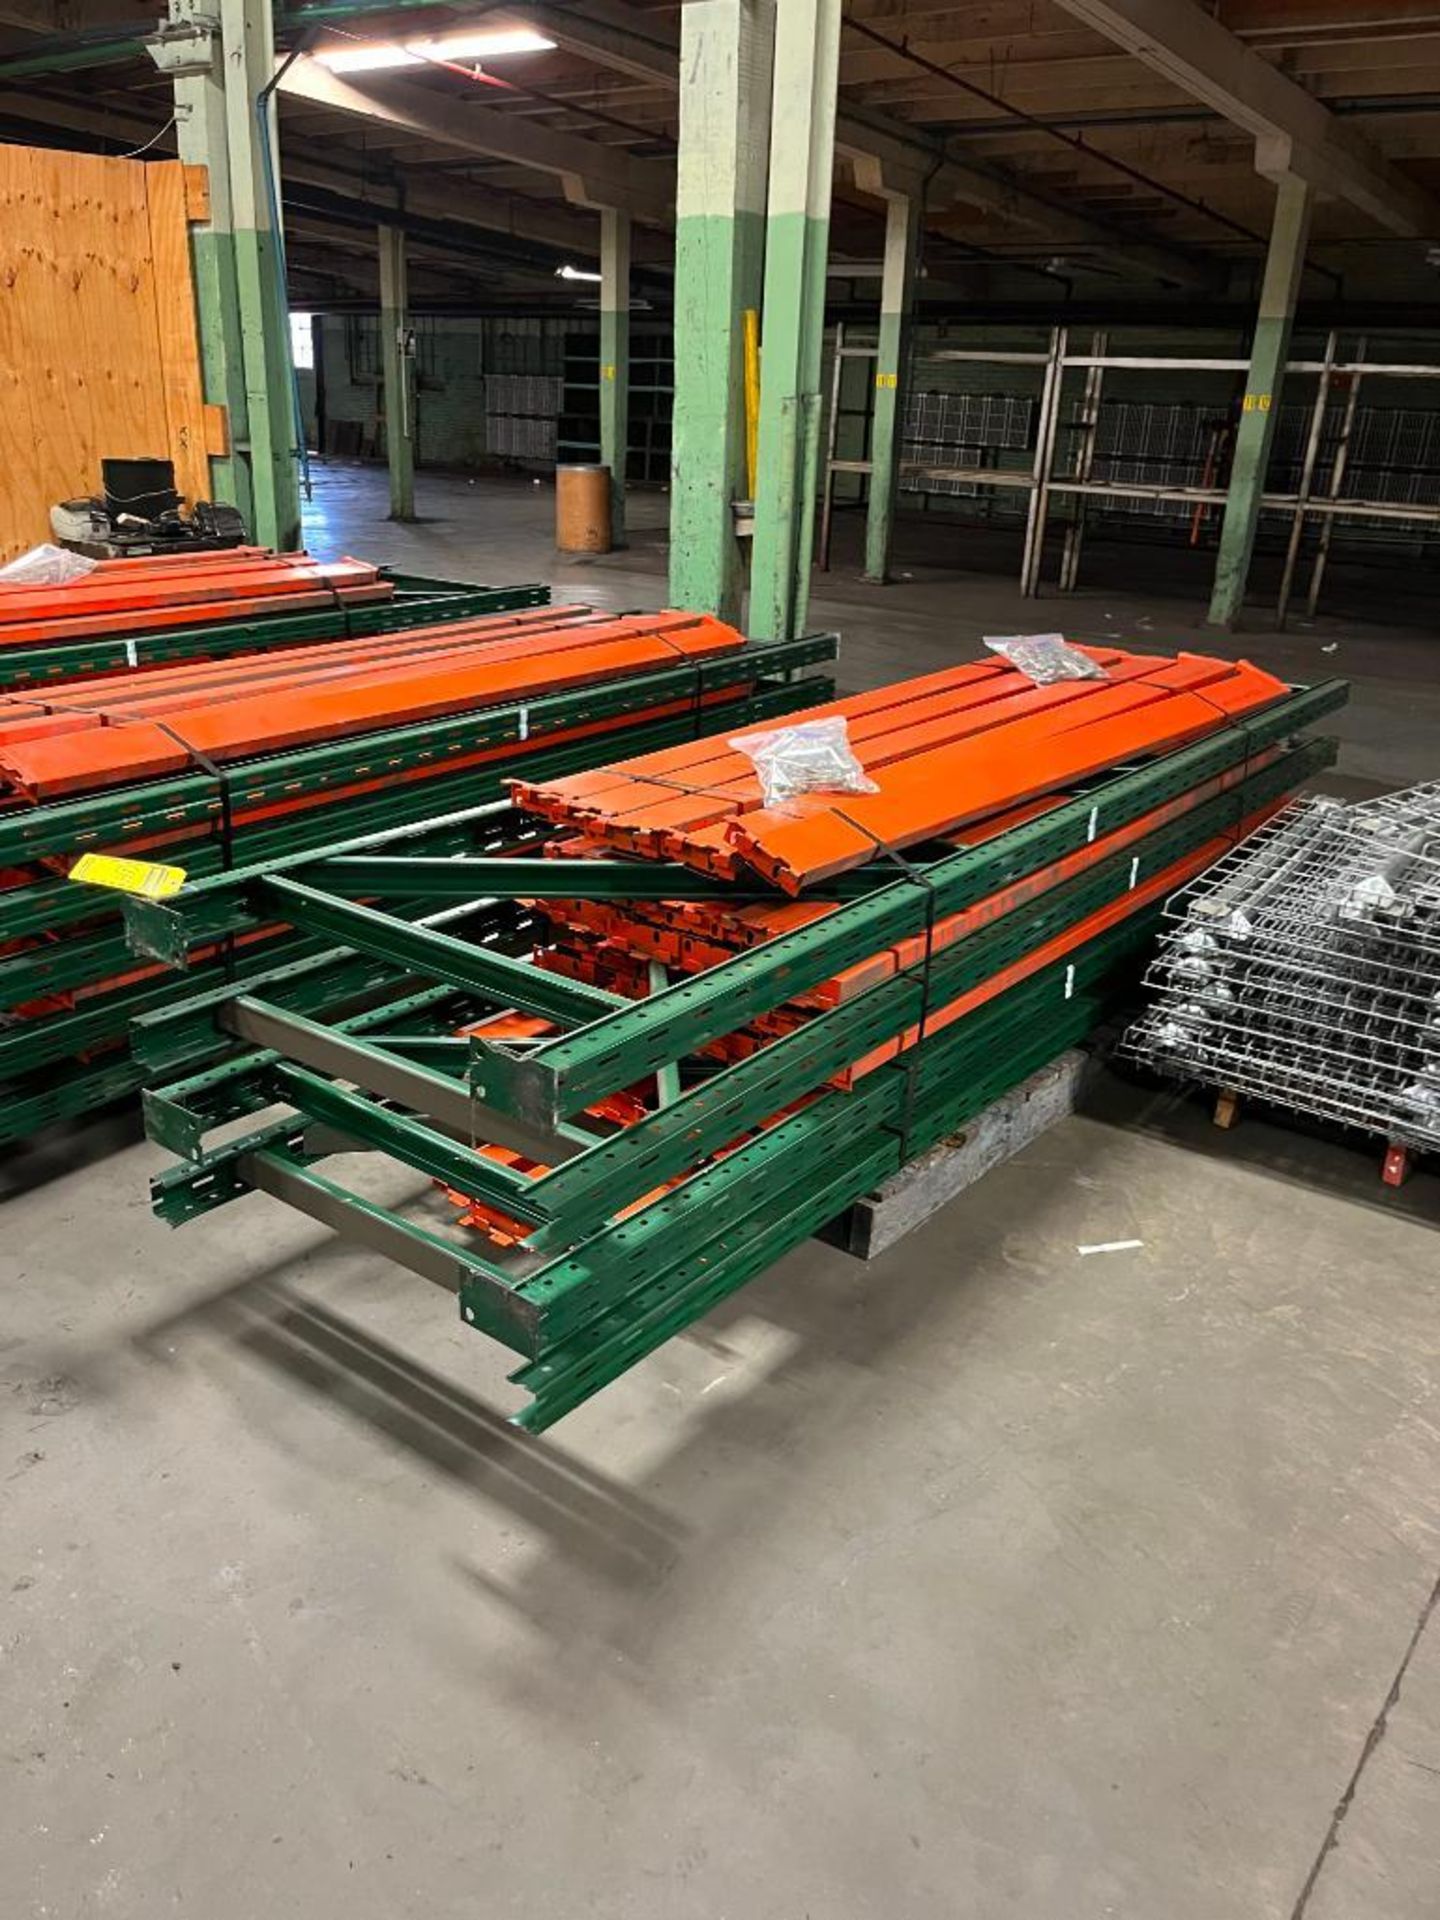 SKID OF SLOTTED STYLE PALLET RACK INCL.: (5) 12' X 36" SLOTTED UPRIGHTS, (35) 4" X 96" CROSS BEAMS